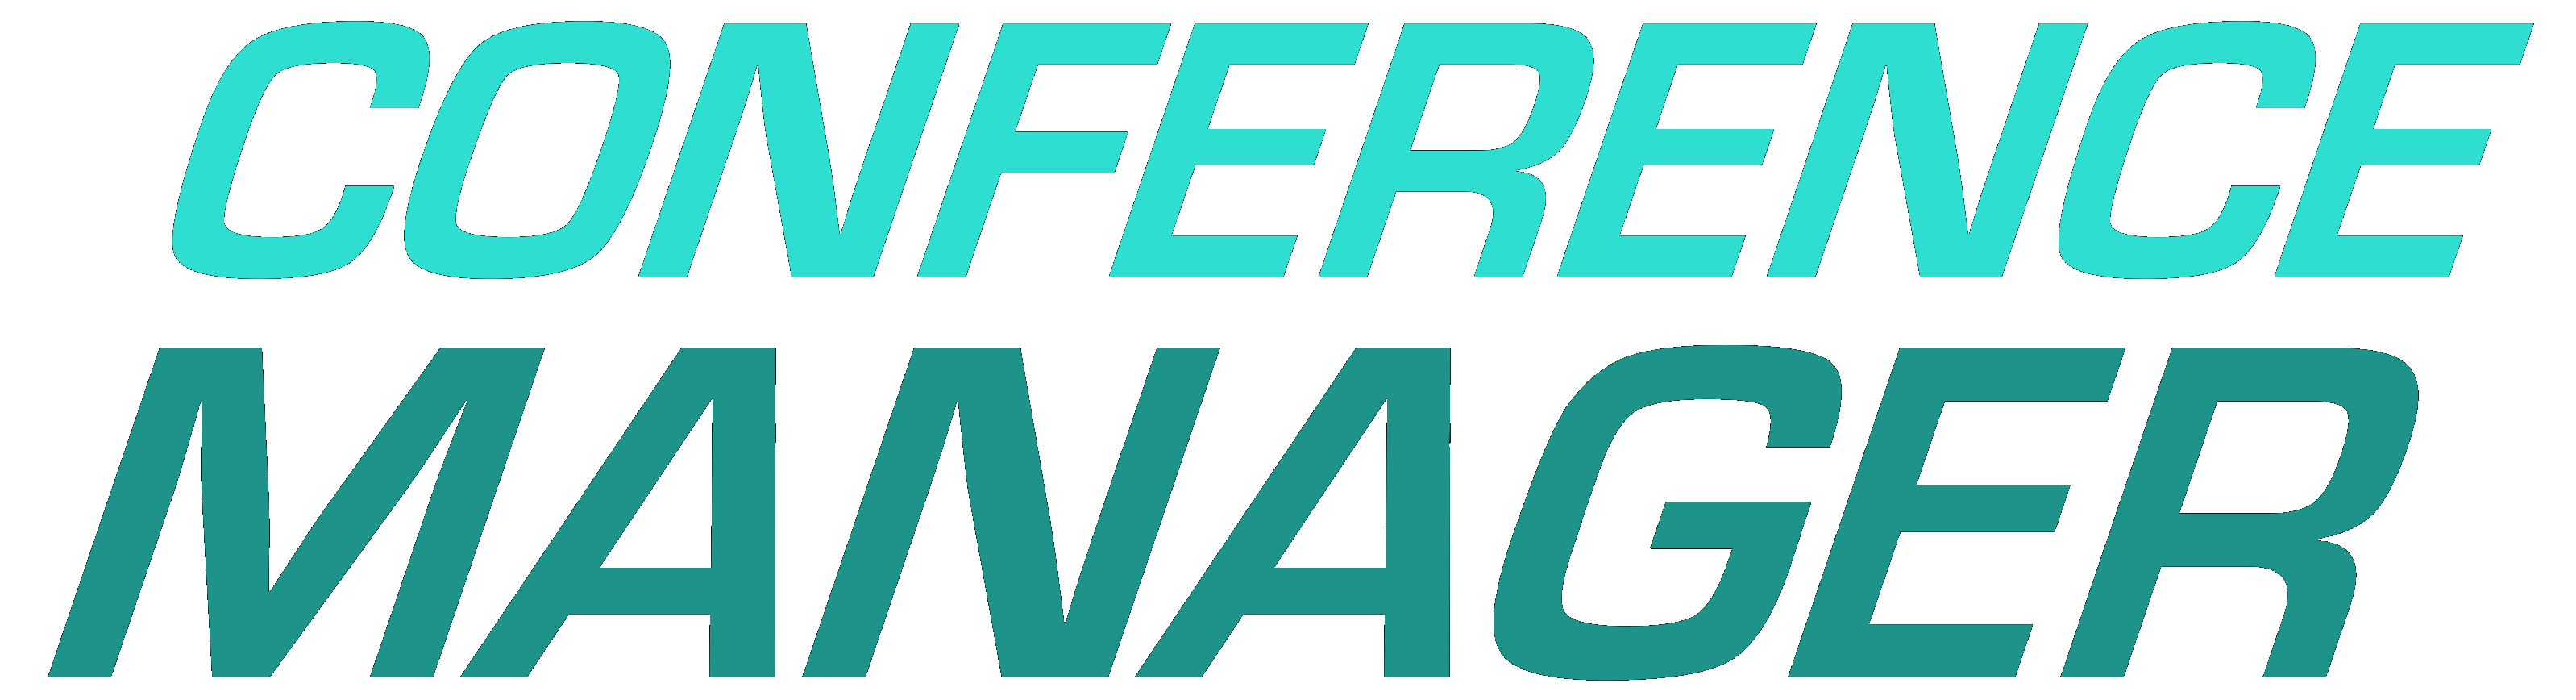 Conference Manager logo